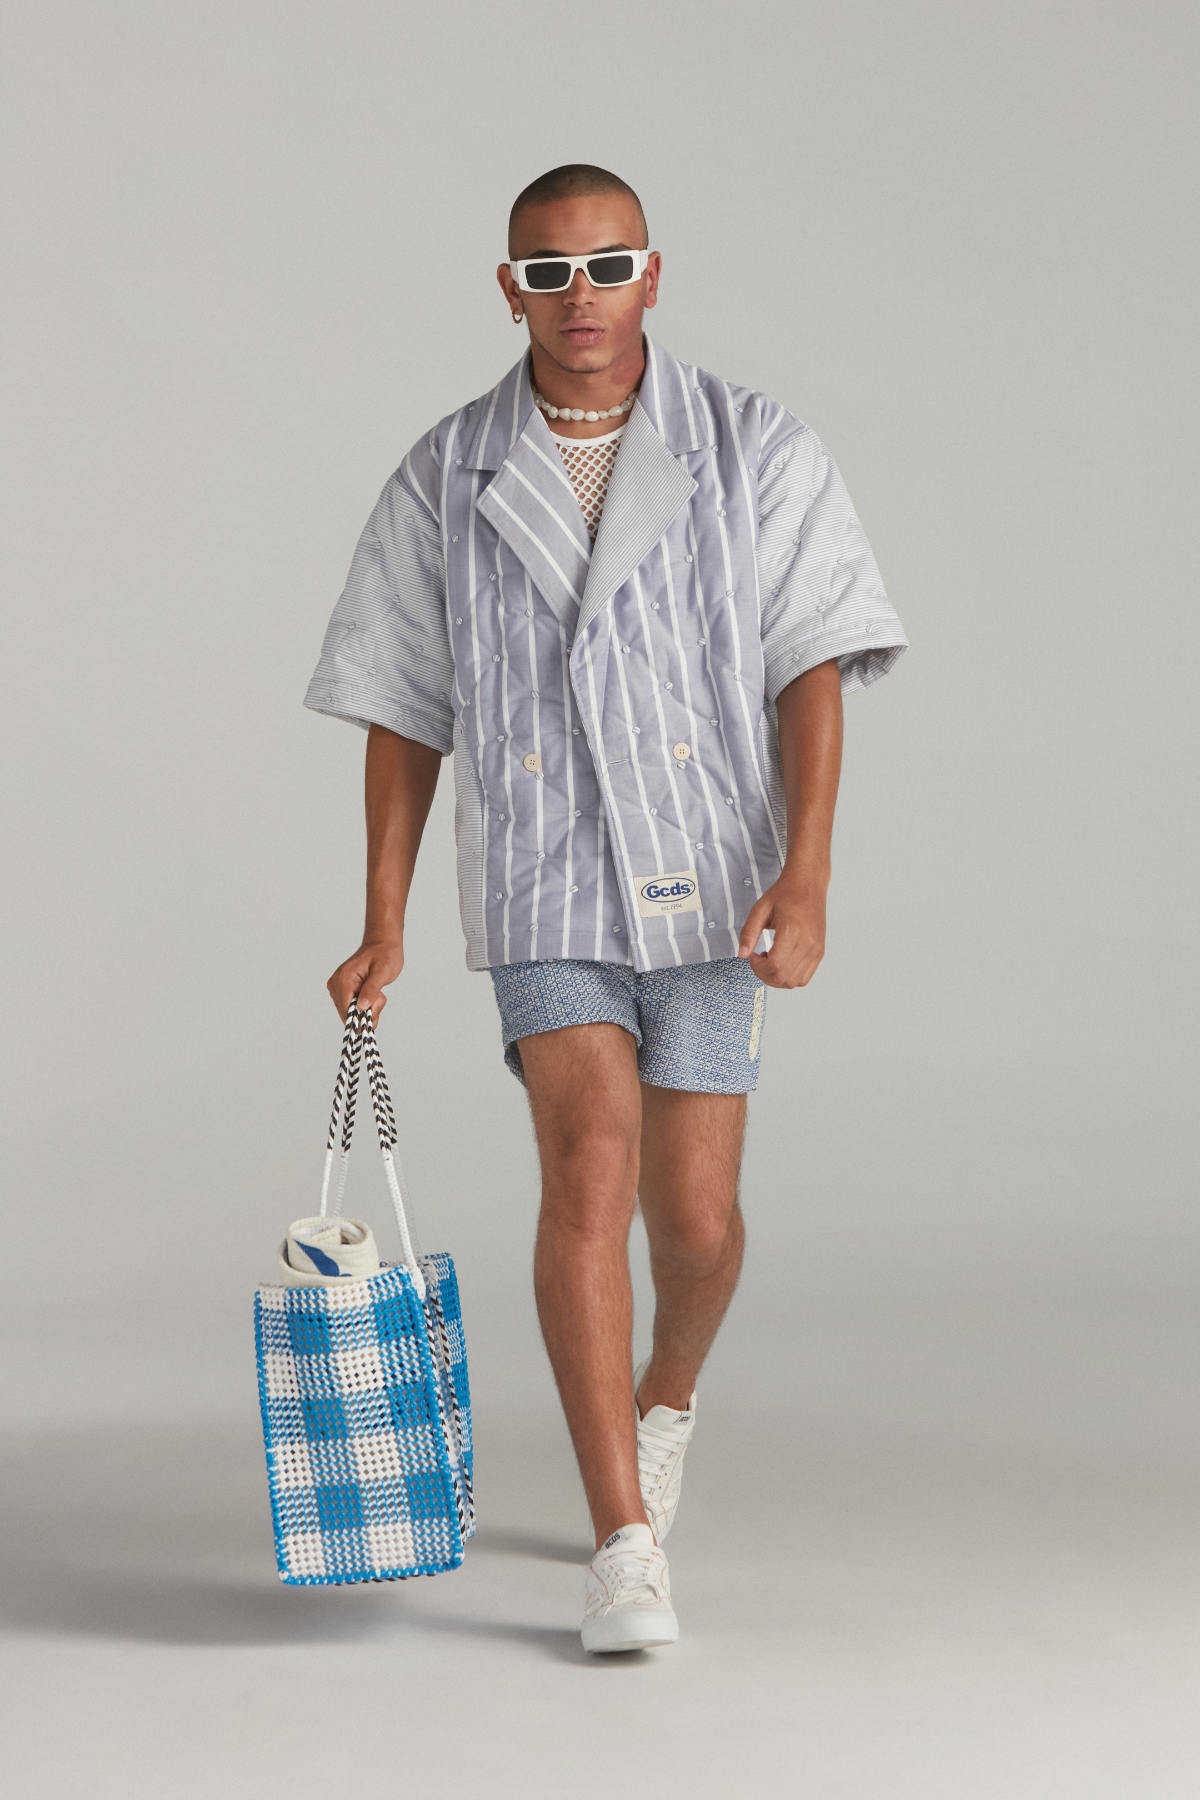 GCDS Presents Its New Spring Summer 2022 Collection: Island Appropriate